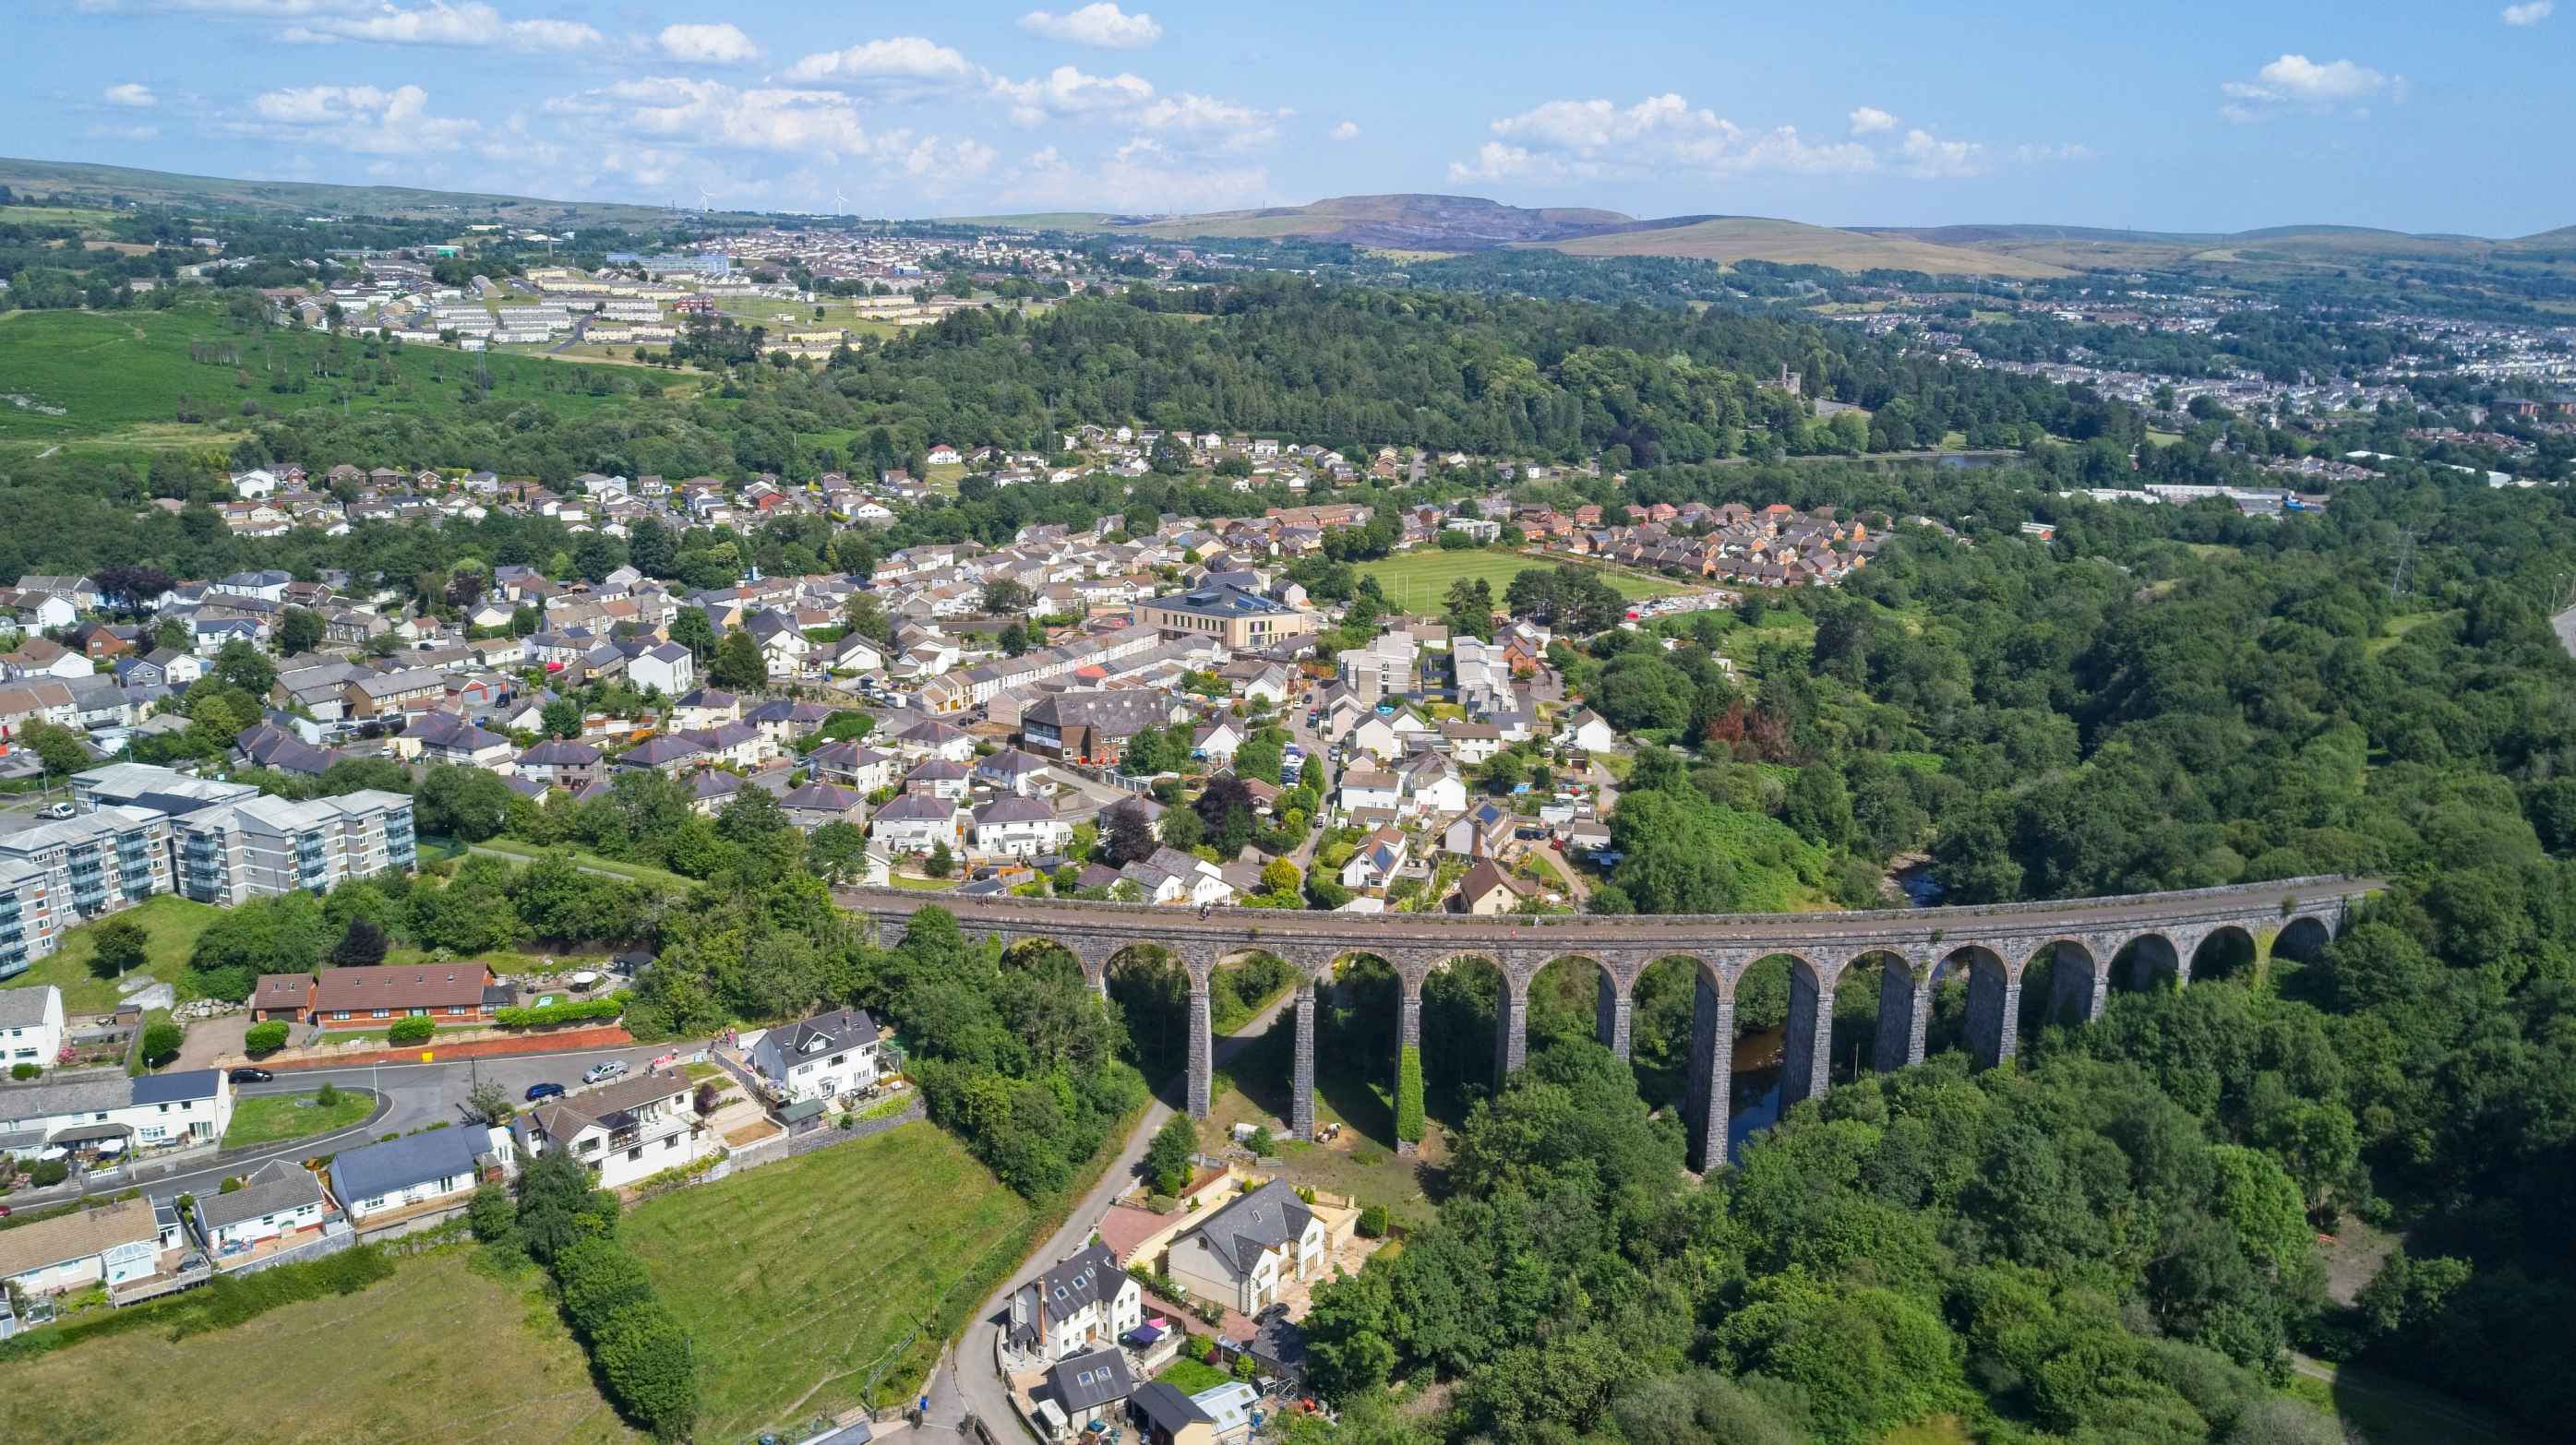 A landscape image of Merthyr Tydfil, showing houses, a bridge and other buildings as well as green space.